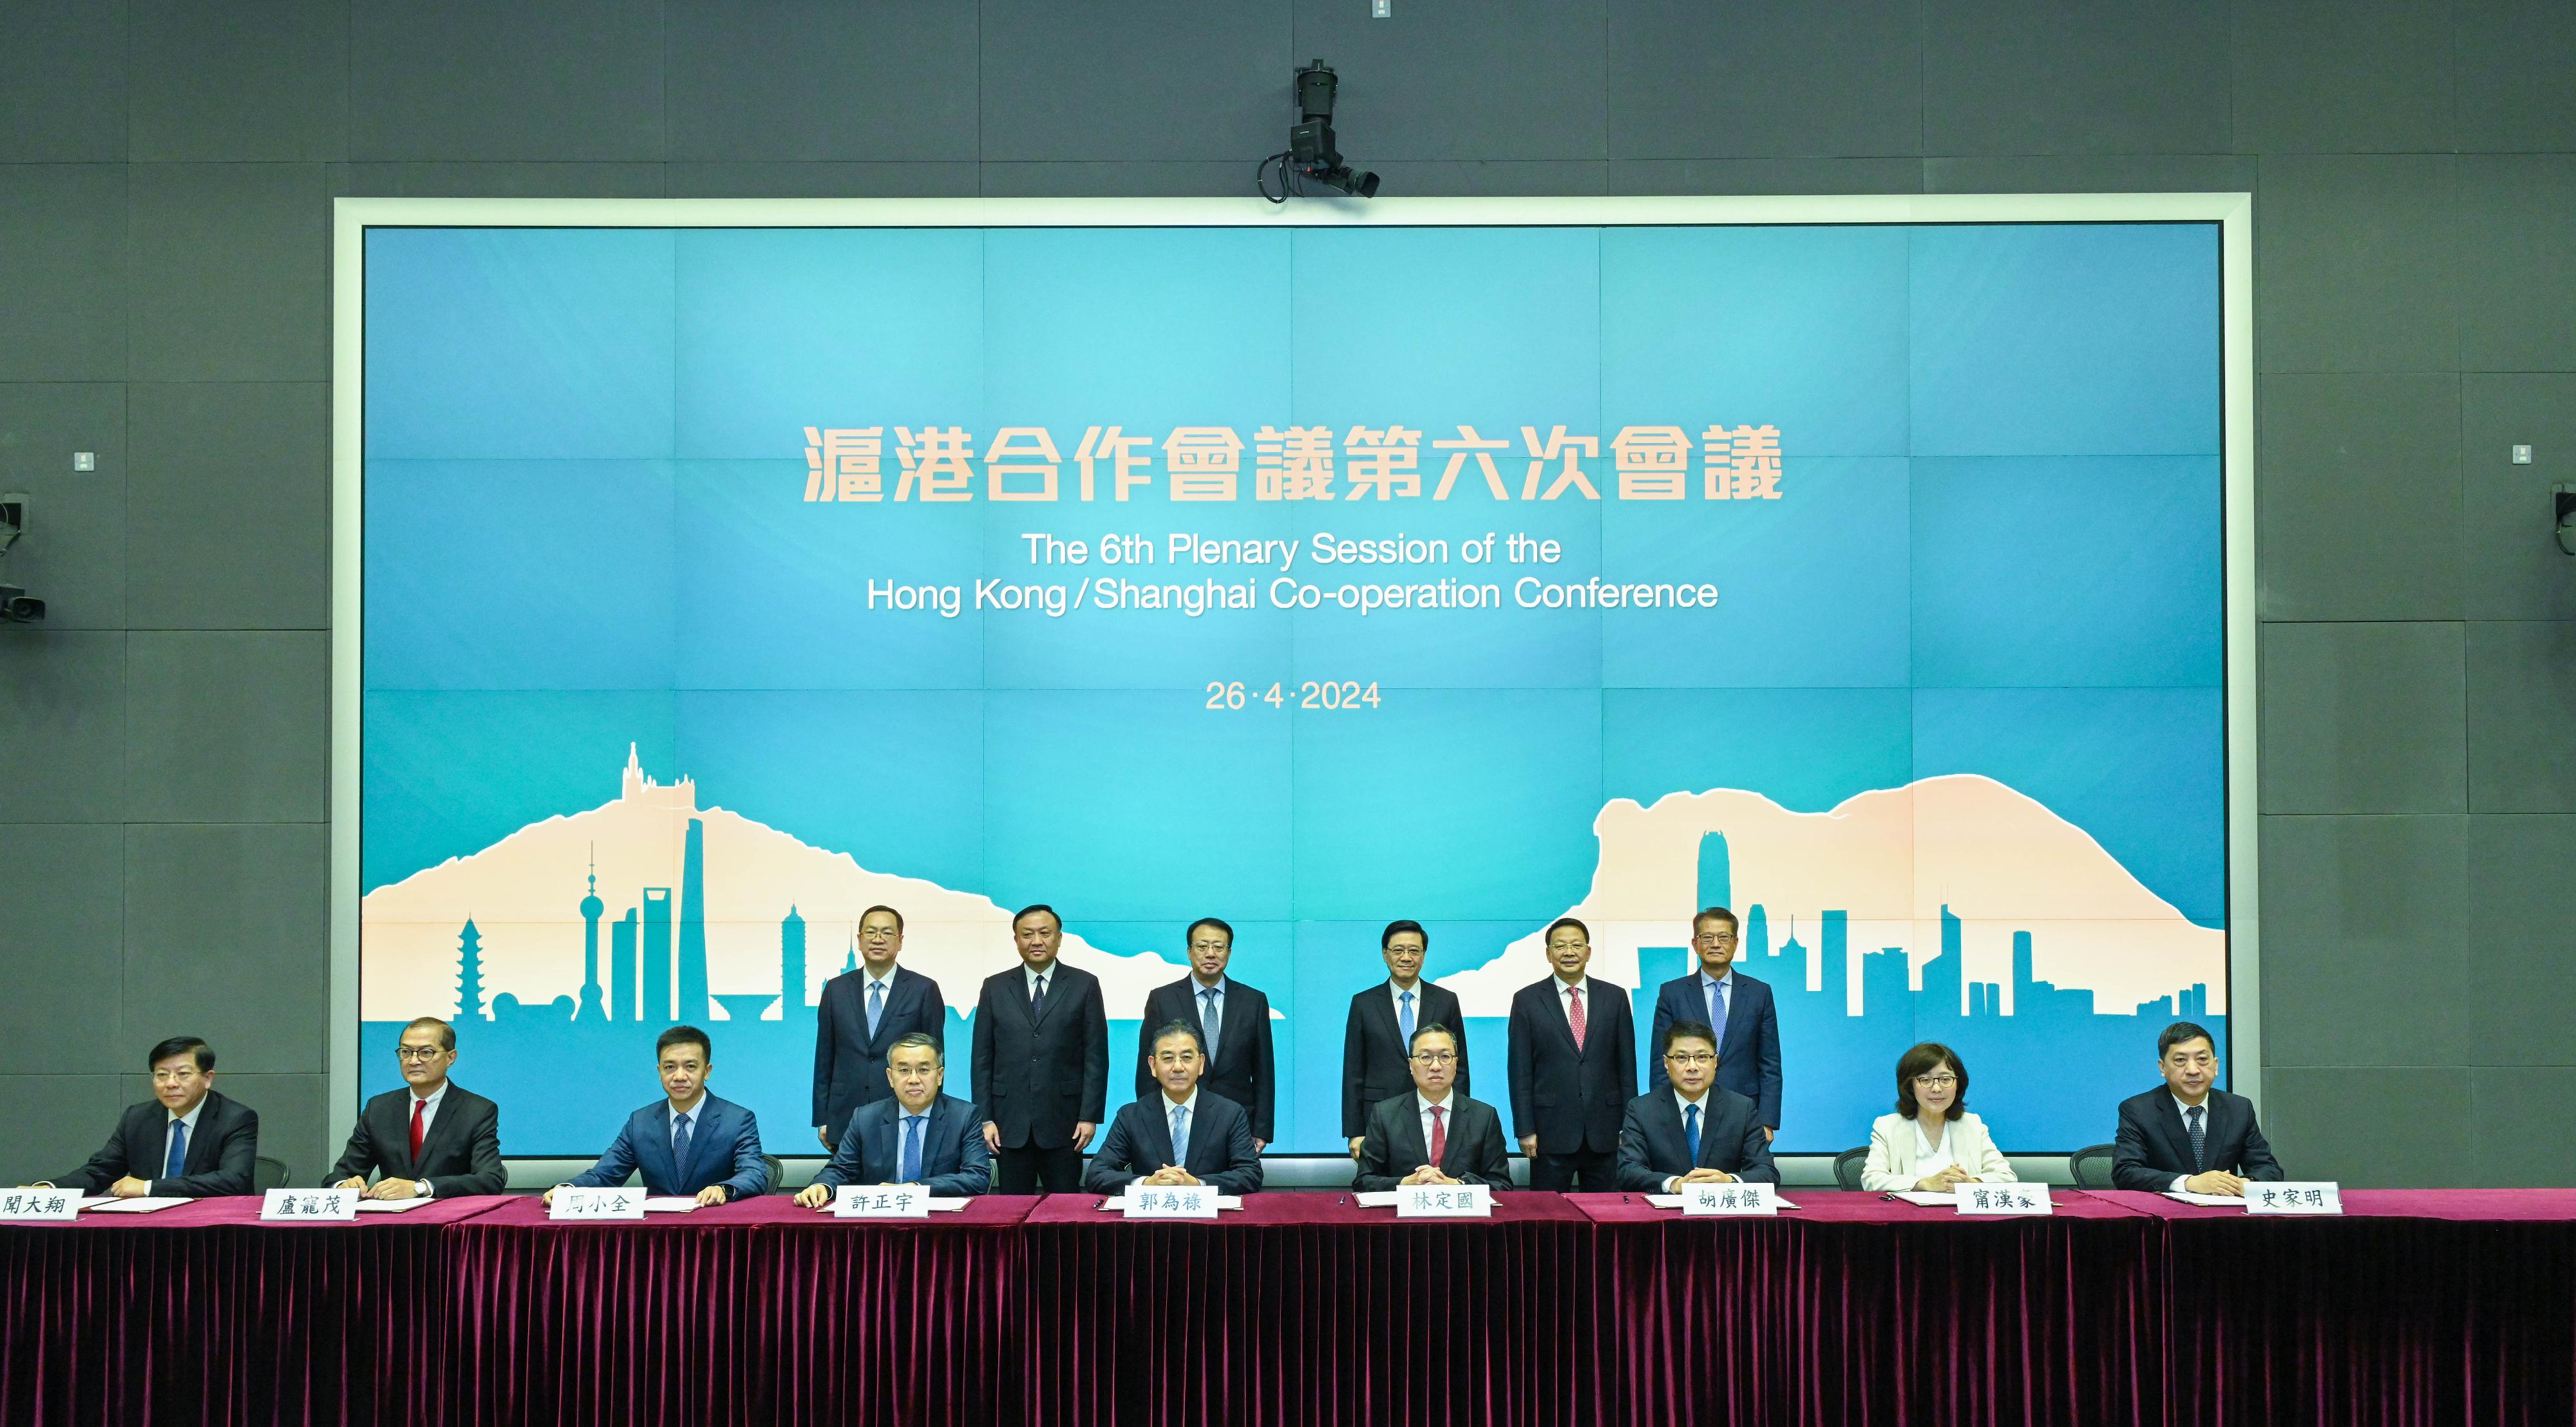 The Chief Executive, Mr John Lee, and the Mayor of Shanghai, Mr Gong Zheng, leading delegations of the governments of the Hong Kong Special Administrative Region and Shanghai respectively, held the Sixth Plenary Session of the Hong Kong/Shanghai Co-operation Conference in Hong Kong today (April 26). Photo shows (back row from left) the Director of Bureau III of the Hong Kong and Macao Work Office of the Communist Party of China Central Committee and the Hong Kong and Macao Affairs Office of the State Council, Mr Zou Jinsong; Vice Mayor of the Shanghai Municipal Government Mr Hua Yuan; Mr Gong; Mr Lee; Deputy Director of the Liaison Office of the Central People's Government in the HKSAR Mr Yin Zonghua; and the Financial Secretary, Mr Paul Chan, witnessing the signing of seven co-operation agreements by government departments of the two places.

